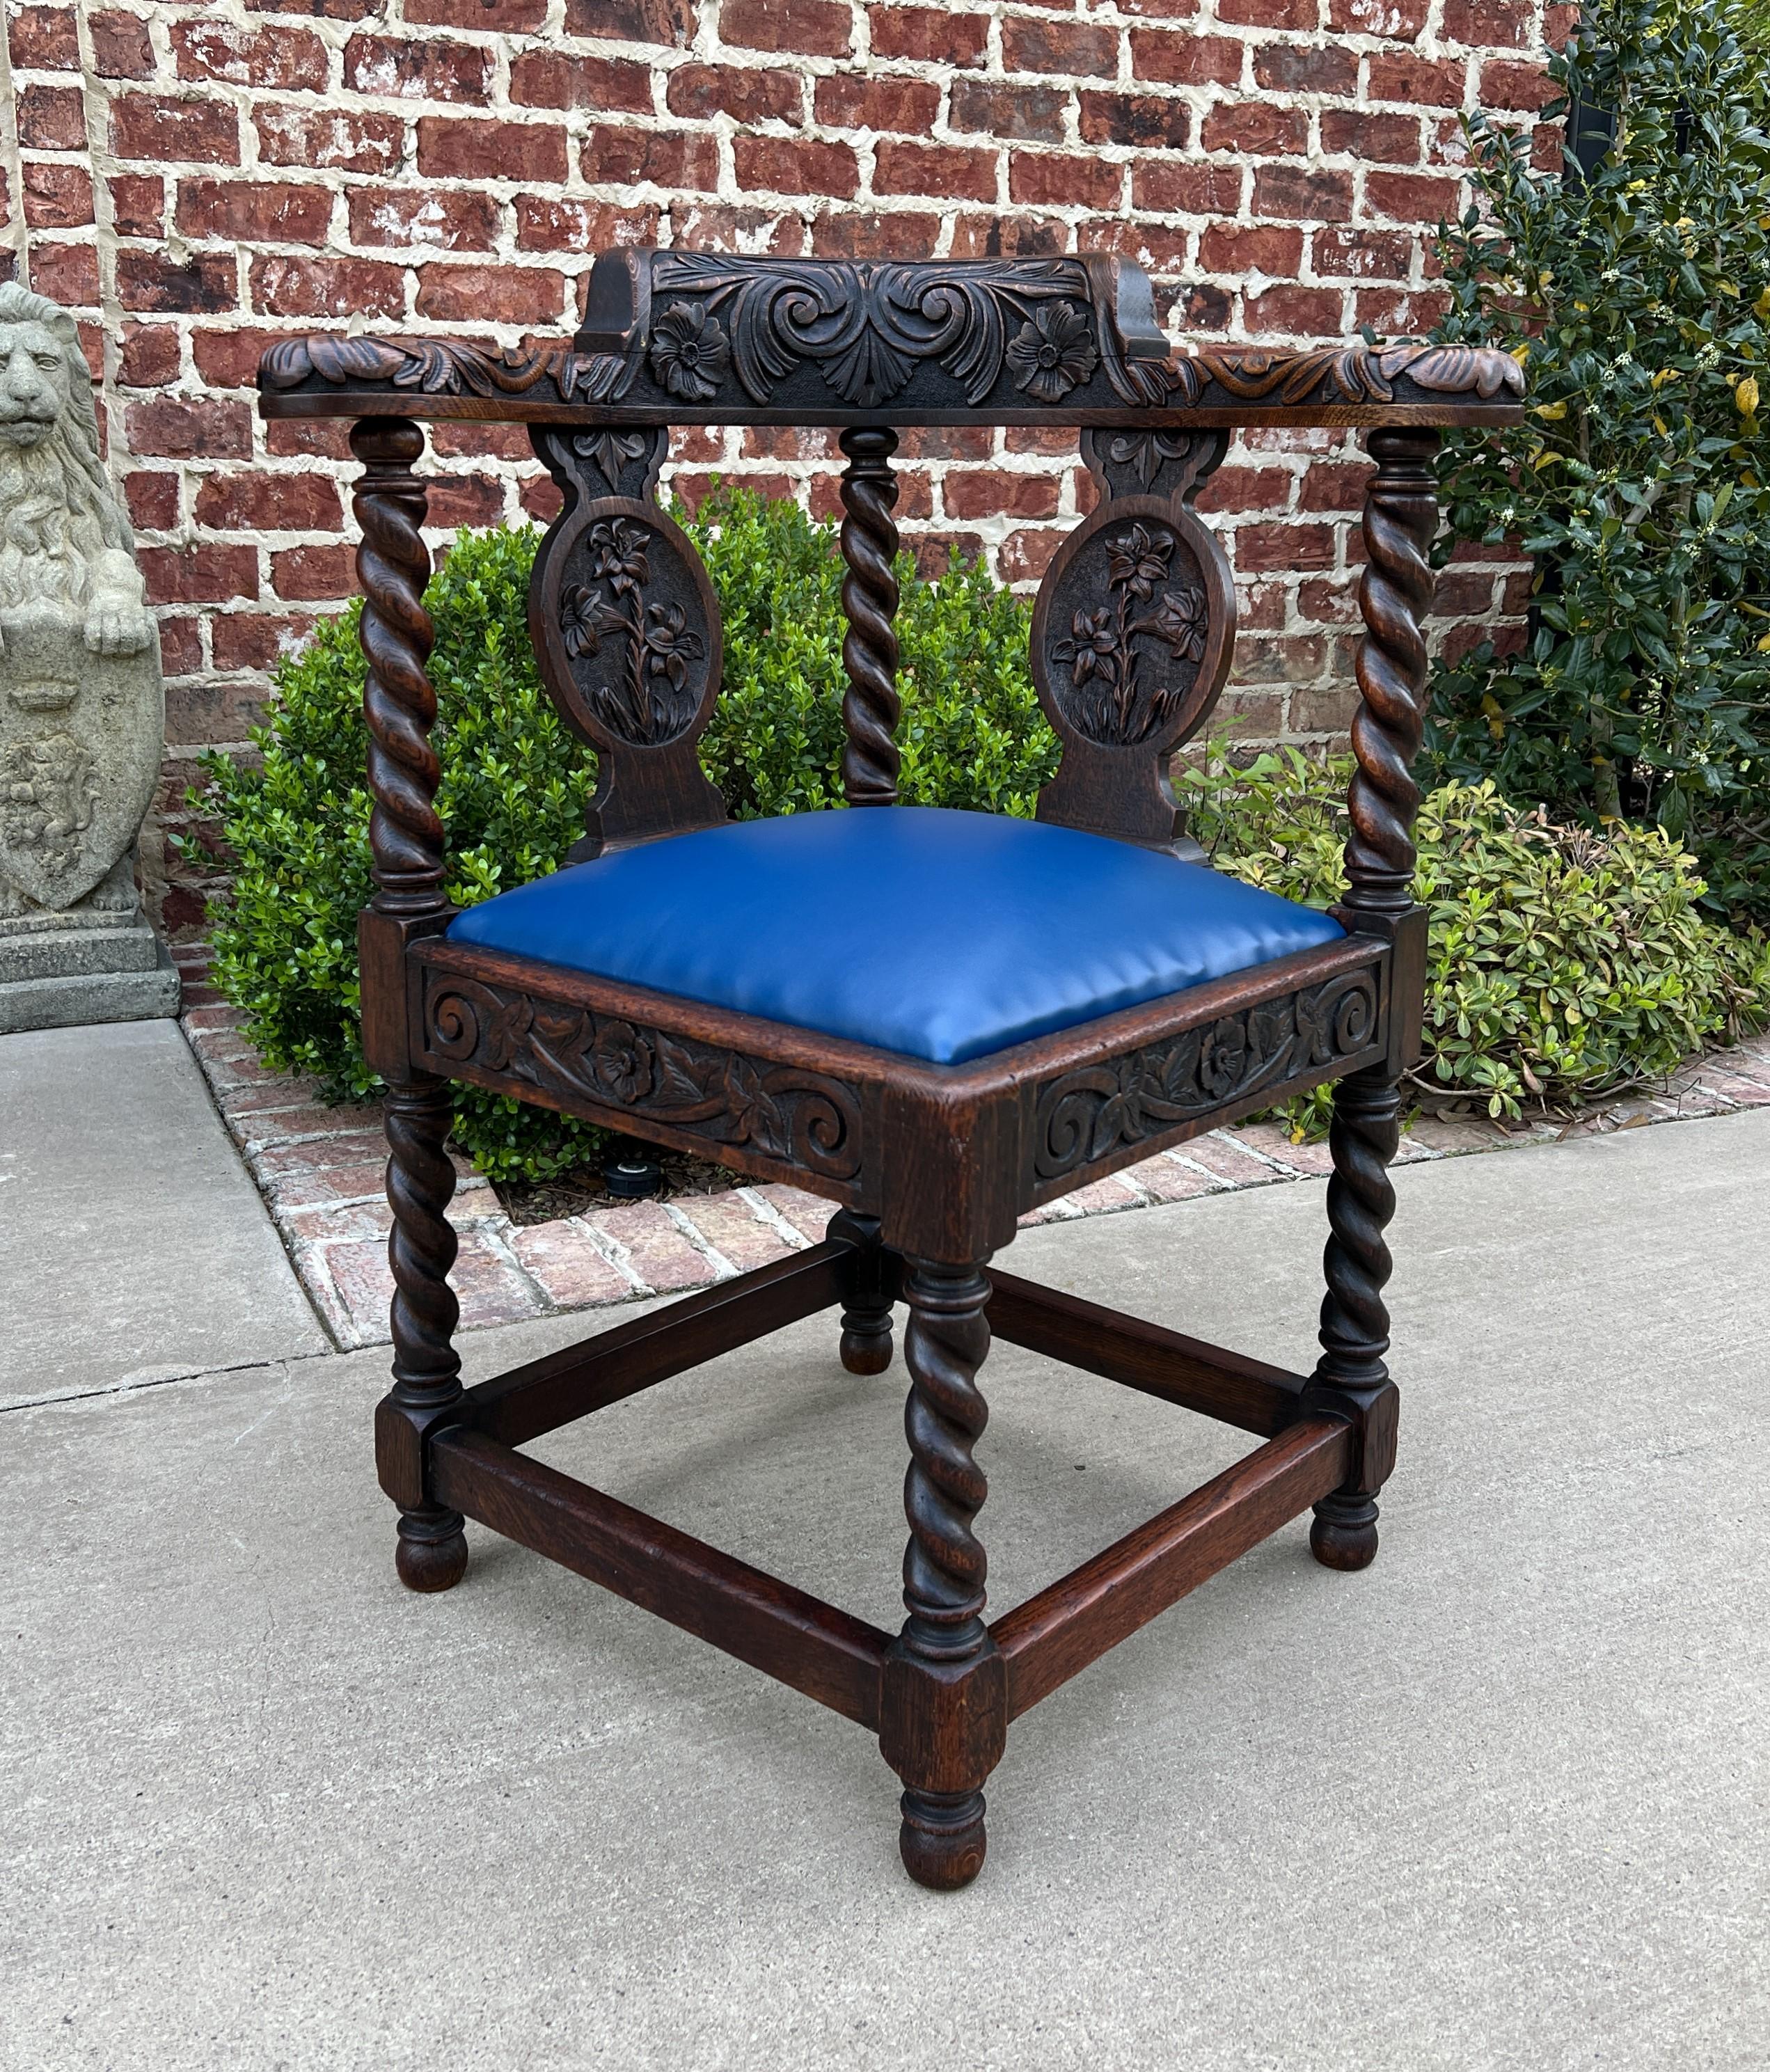 STUNNING Antique English Renaissance revival oak barley twist corner chair~~circa 1920s

Classic English charm and style~~notice the DETAIL in the highly carved back, arms, skirt, and barley twist legs

New blue leather upholstered seat with new